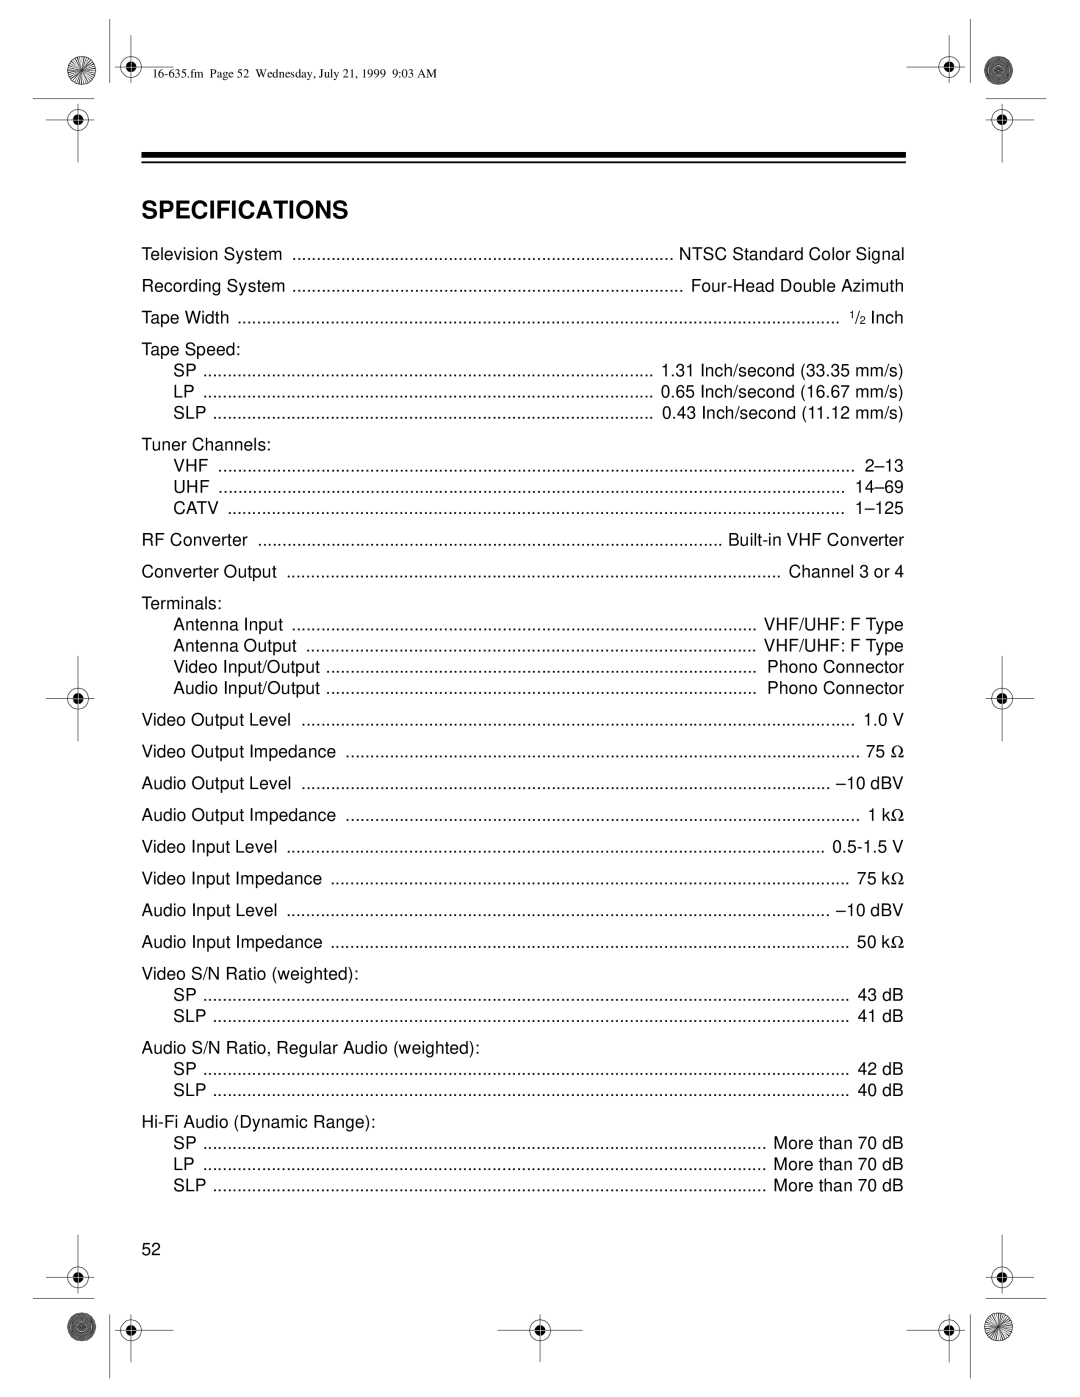 Radio Shack 66 owner manual Specifications, Converter Output 